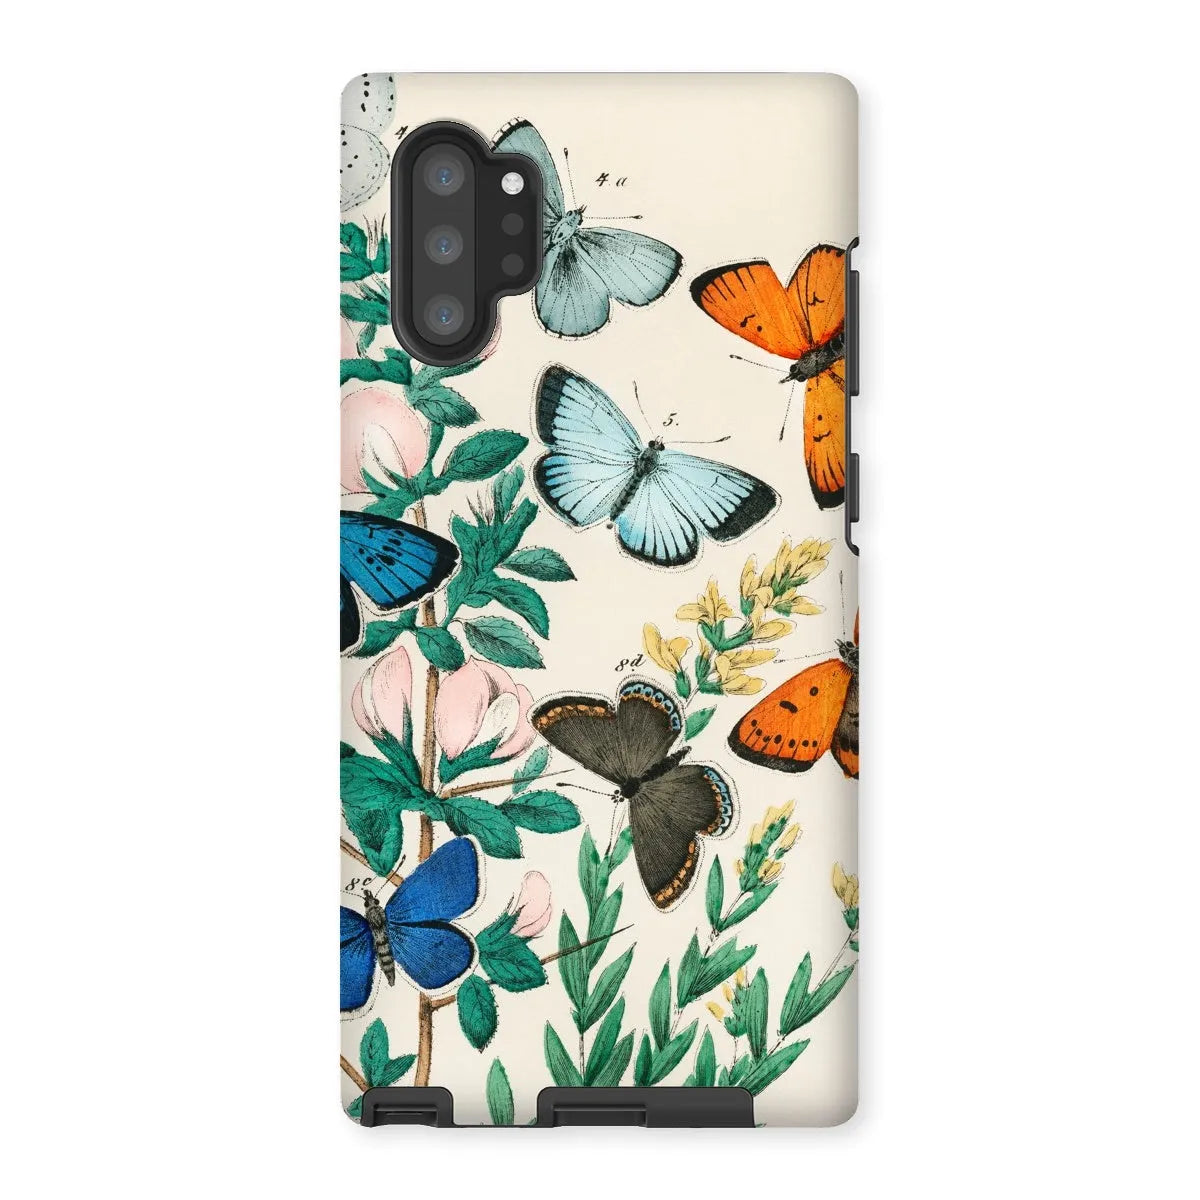 Another Butterfly Aesthetic Art Phone Case - William Forsell Kirby - Samsung Galaxy Note 10p / Matte - Mobile Phone